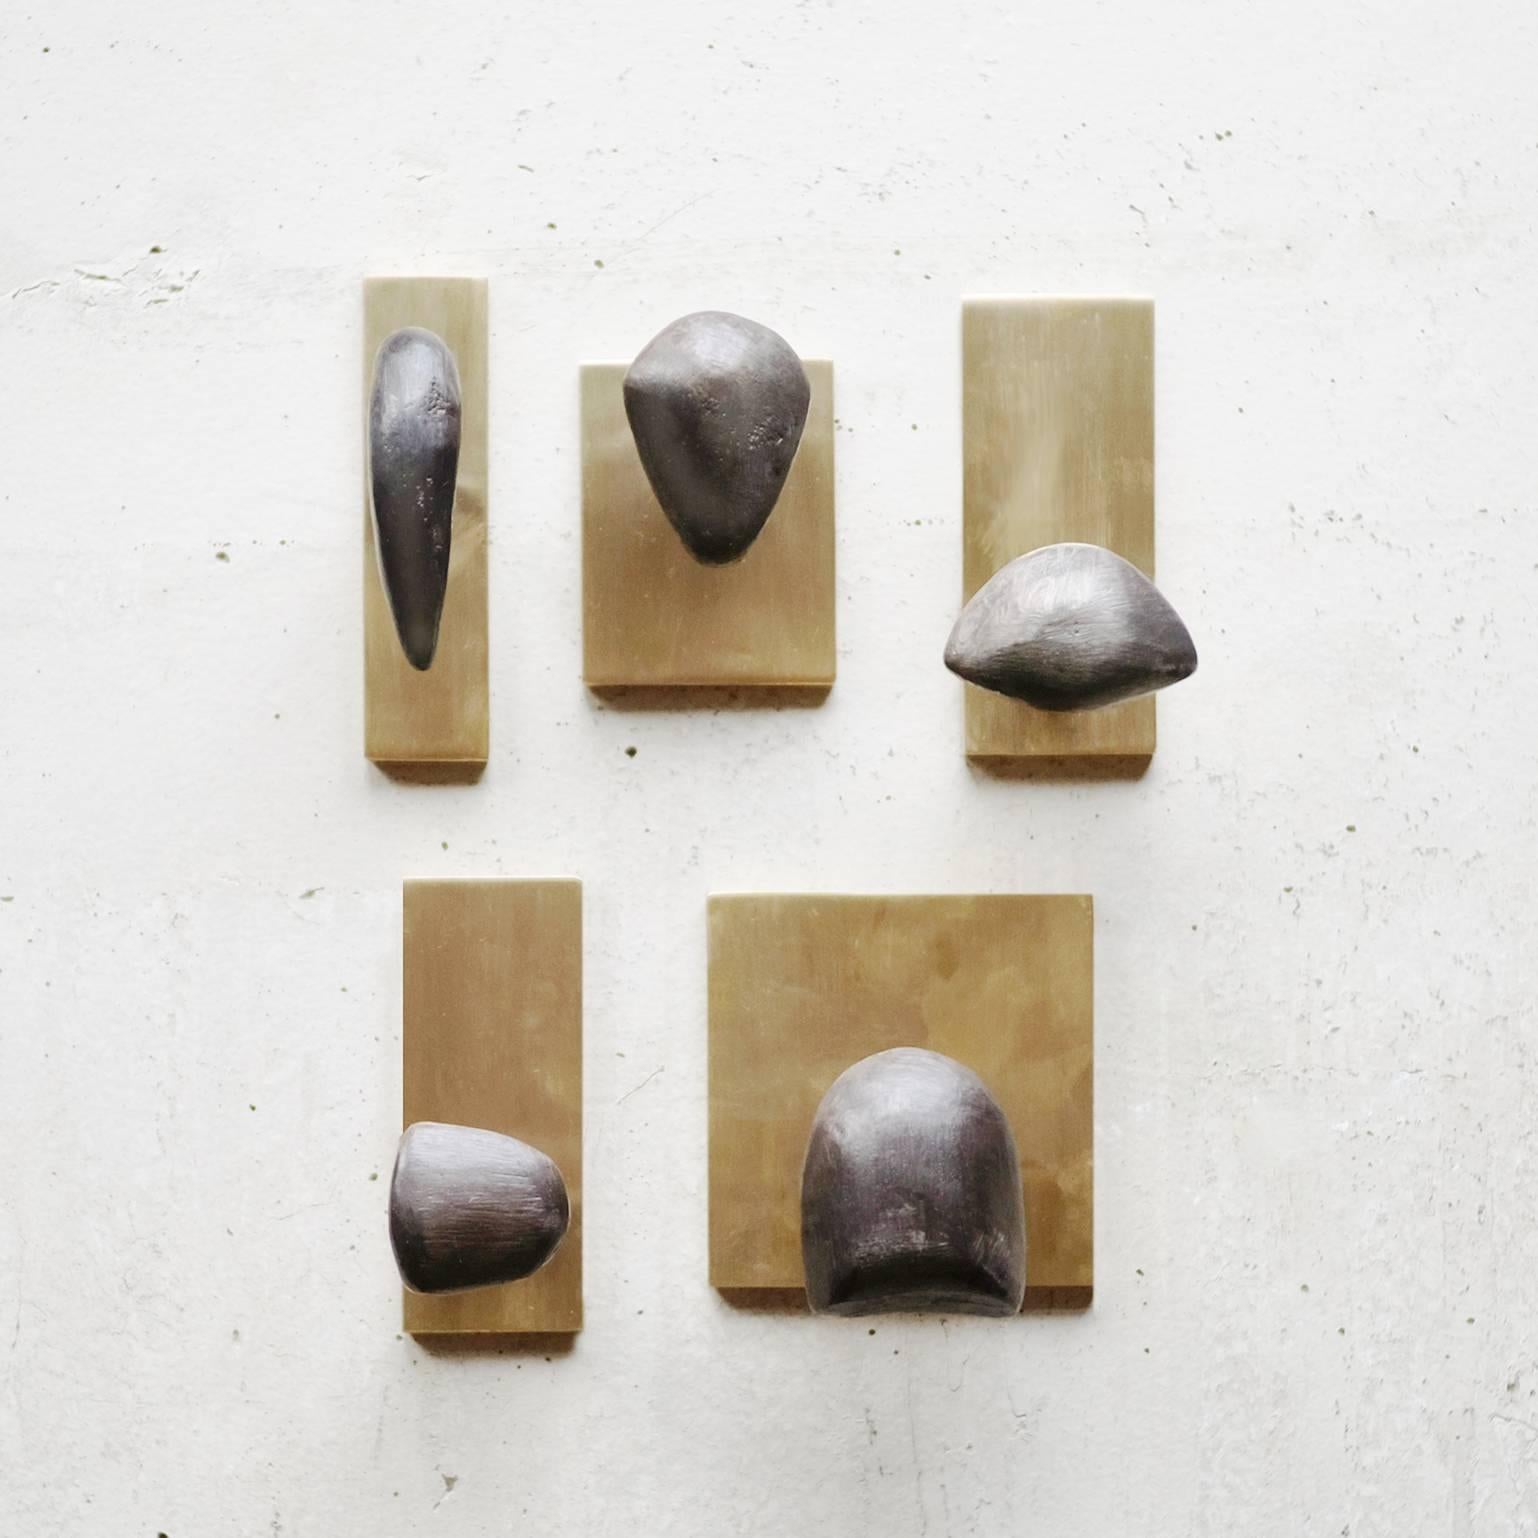 With blackened, cast brass forms soldered to a brass post and plate, the sculptural Tallomet coat hooks are a study in form and contrast. Finished by hand in Portland, Oregon, the hooks feature hidden mounting hardware and are intended to be